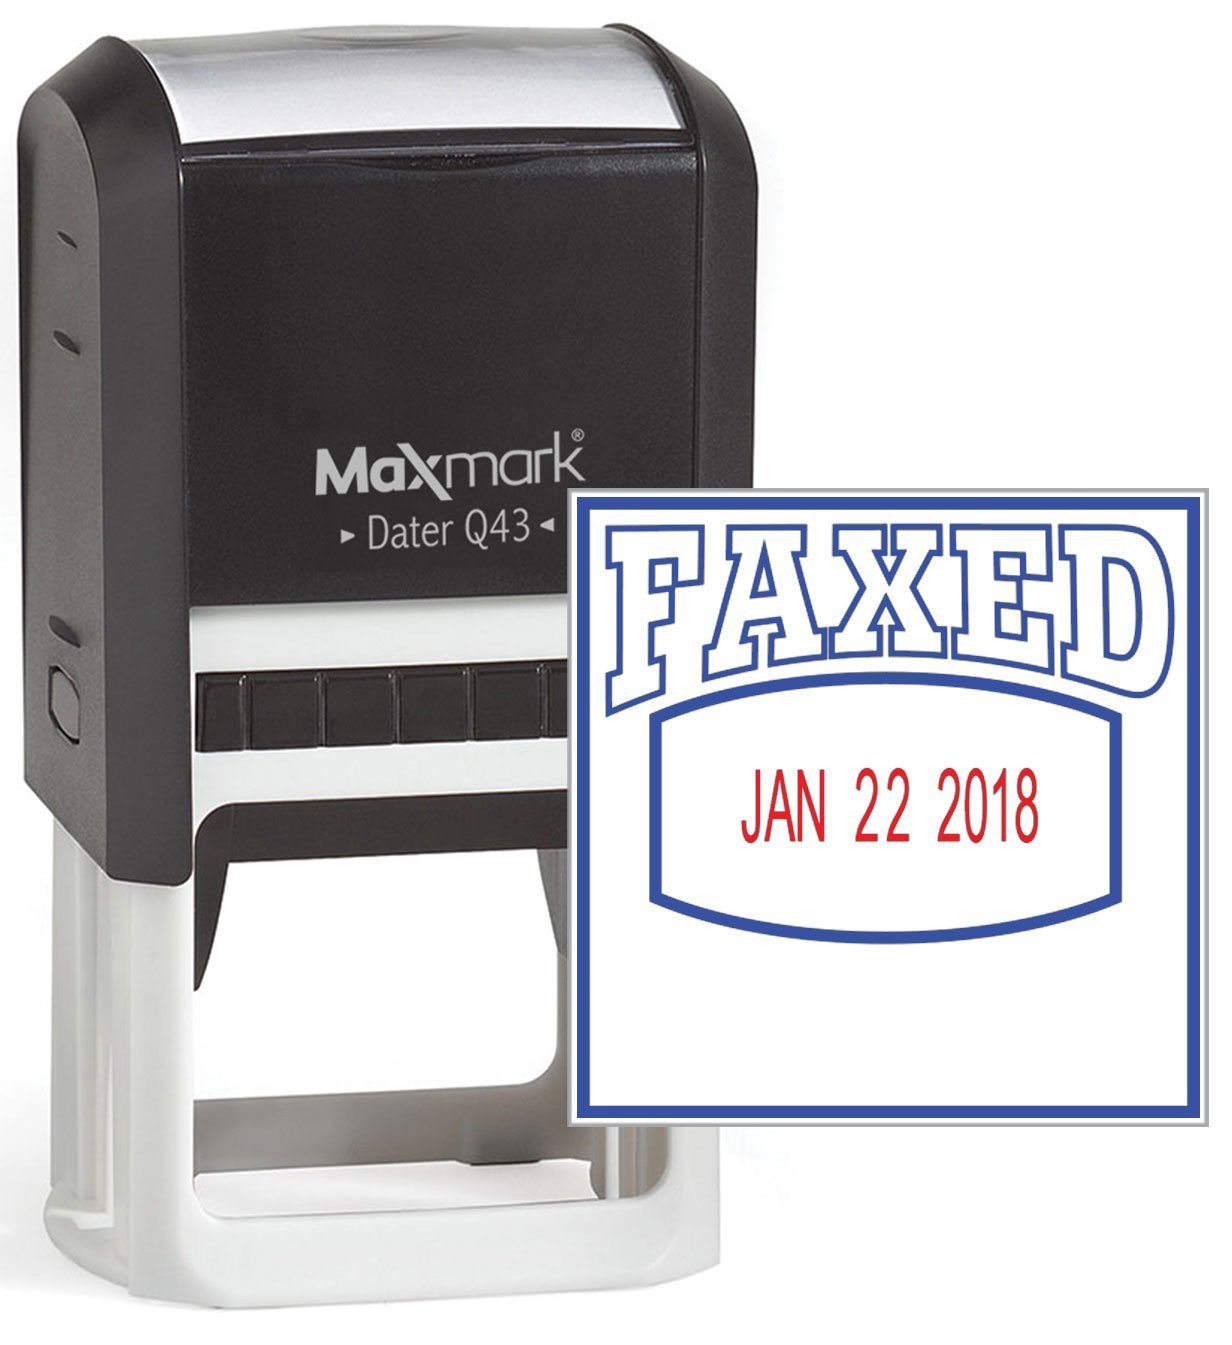 MaxMark Q43 (Large Size) Date Stamp with "FAXED" Self Inking Stamp - Blue/Red Ink